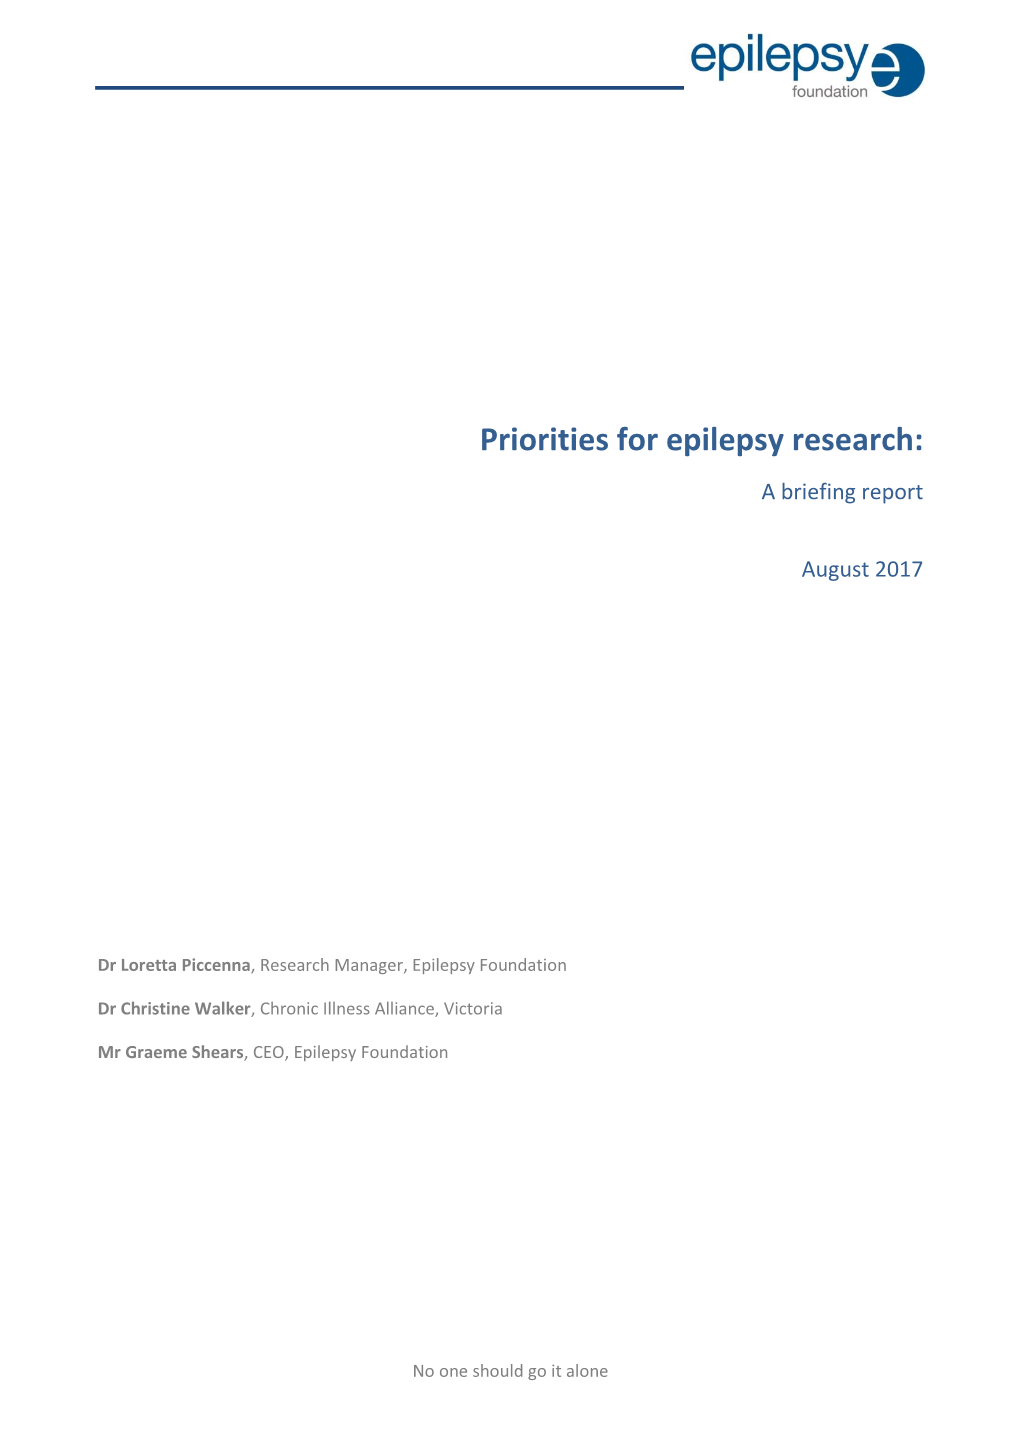 Priorities for Epilepsy Research: a Briefing Report